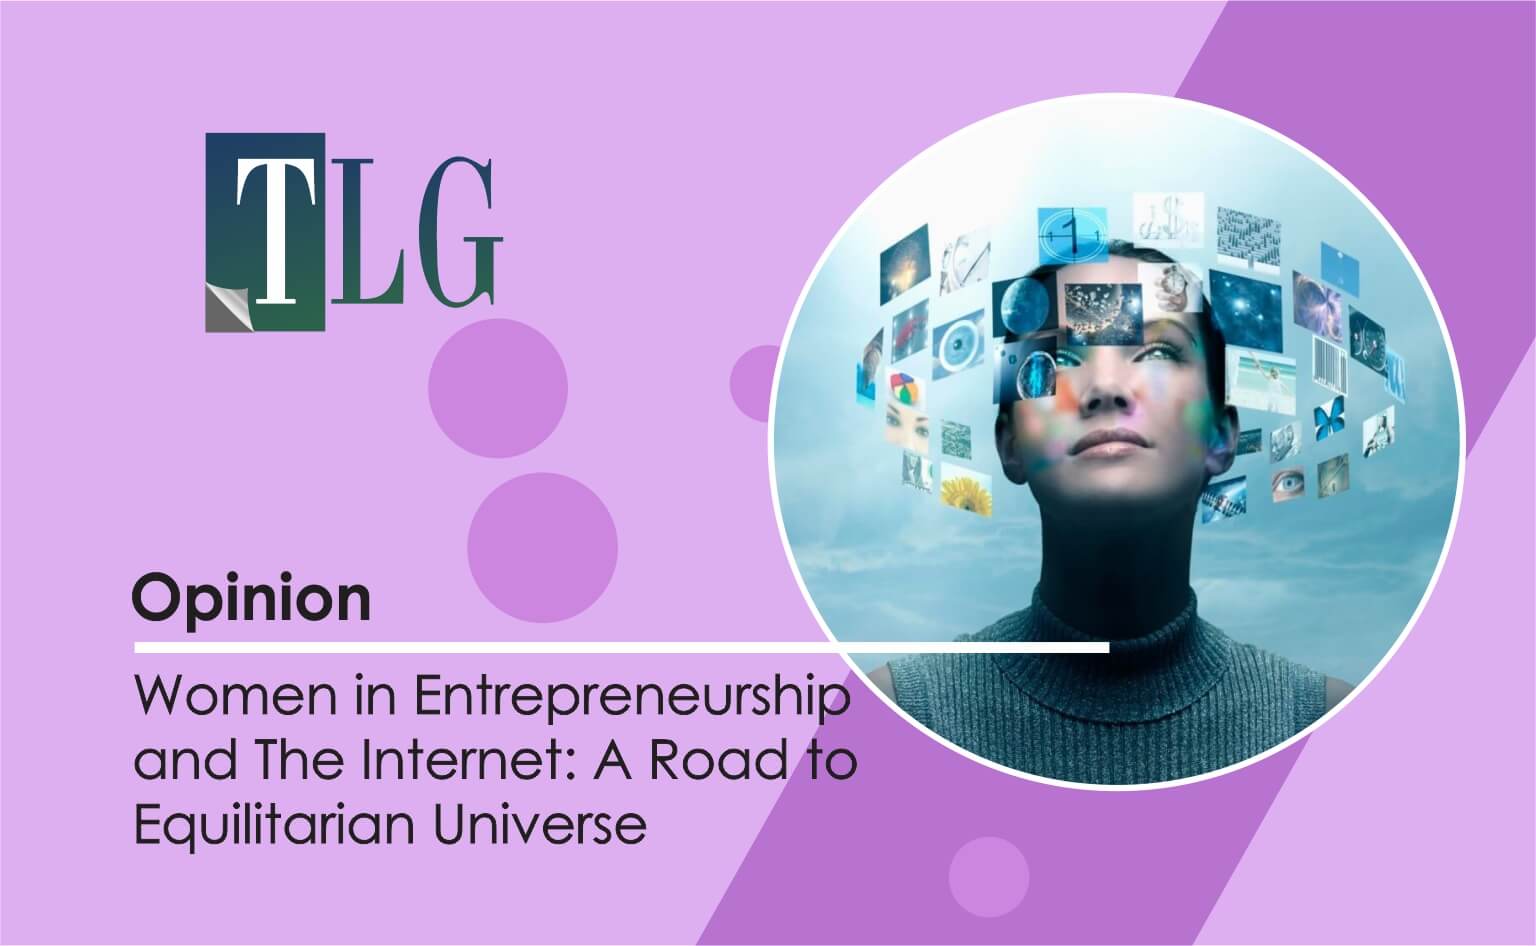 Women in Entrepreneurship and The Internet: A Road to Equilitarian Universe